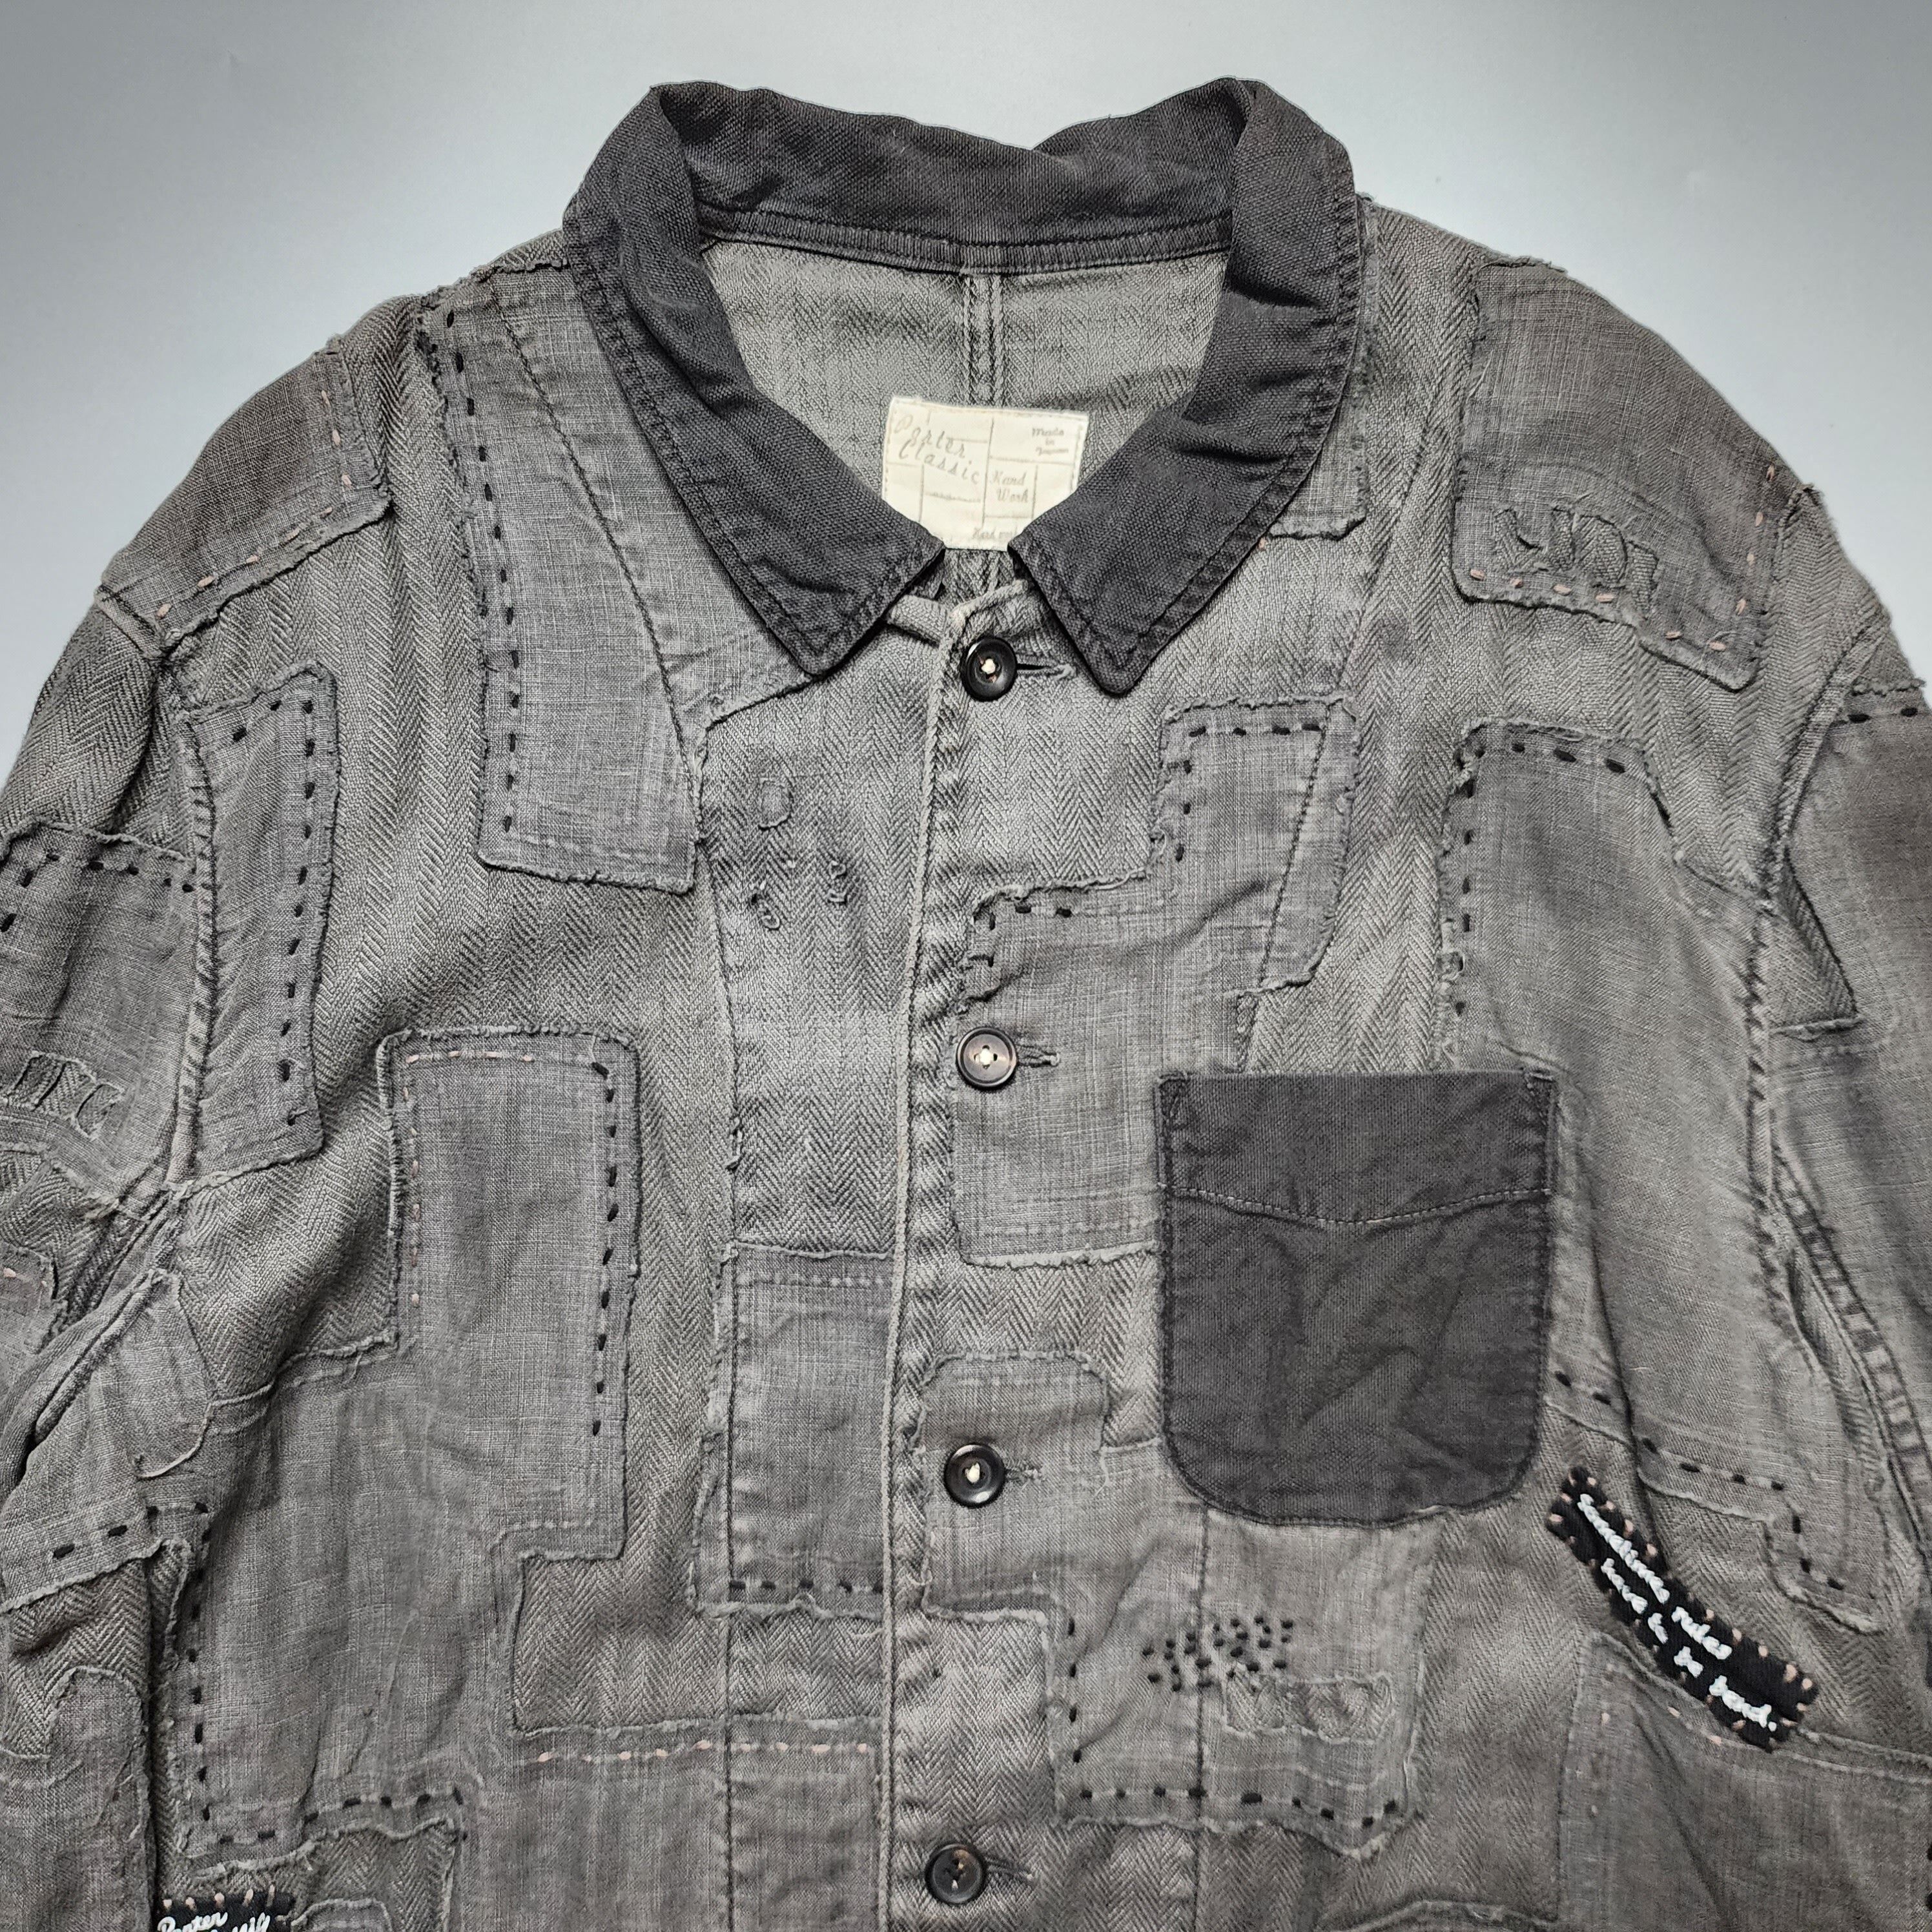 Porter Classic - SS13 Boro Patchwork French Work Jacket - 3